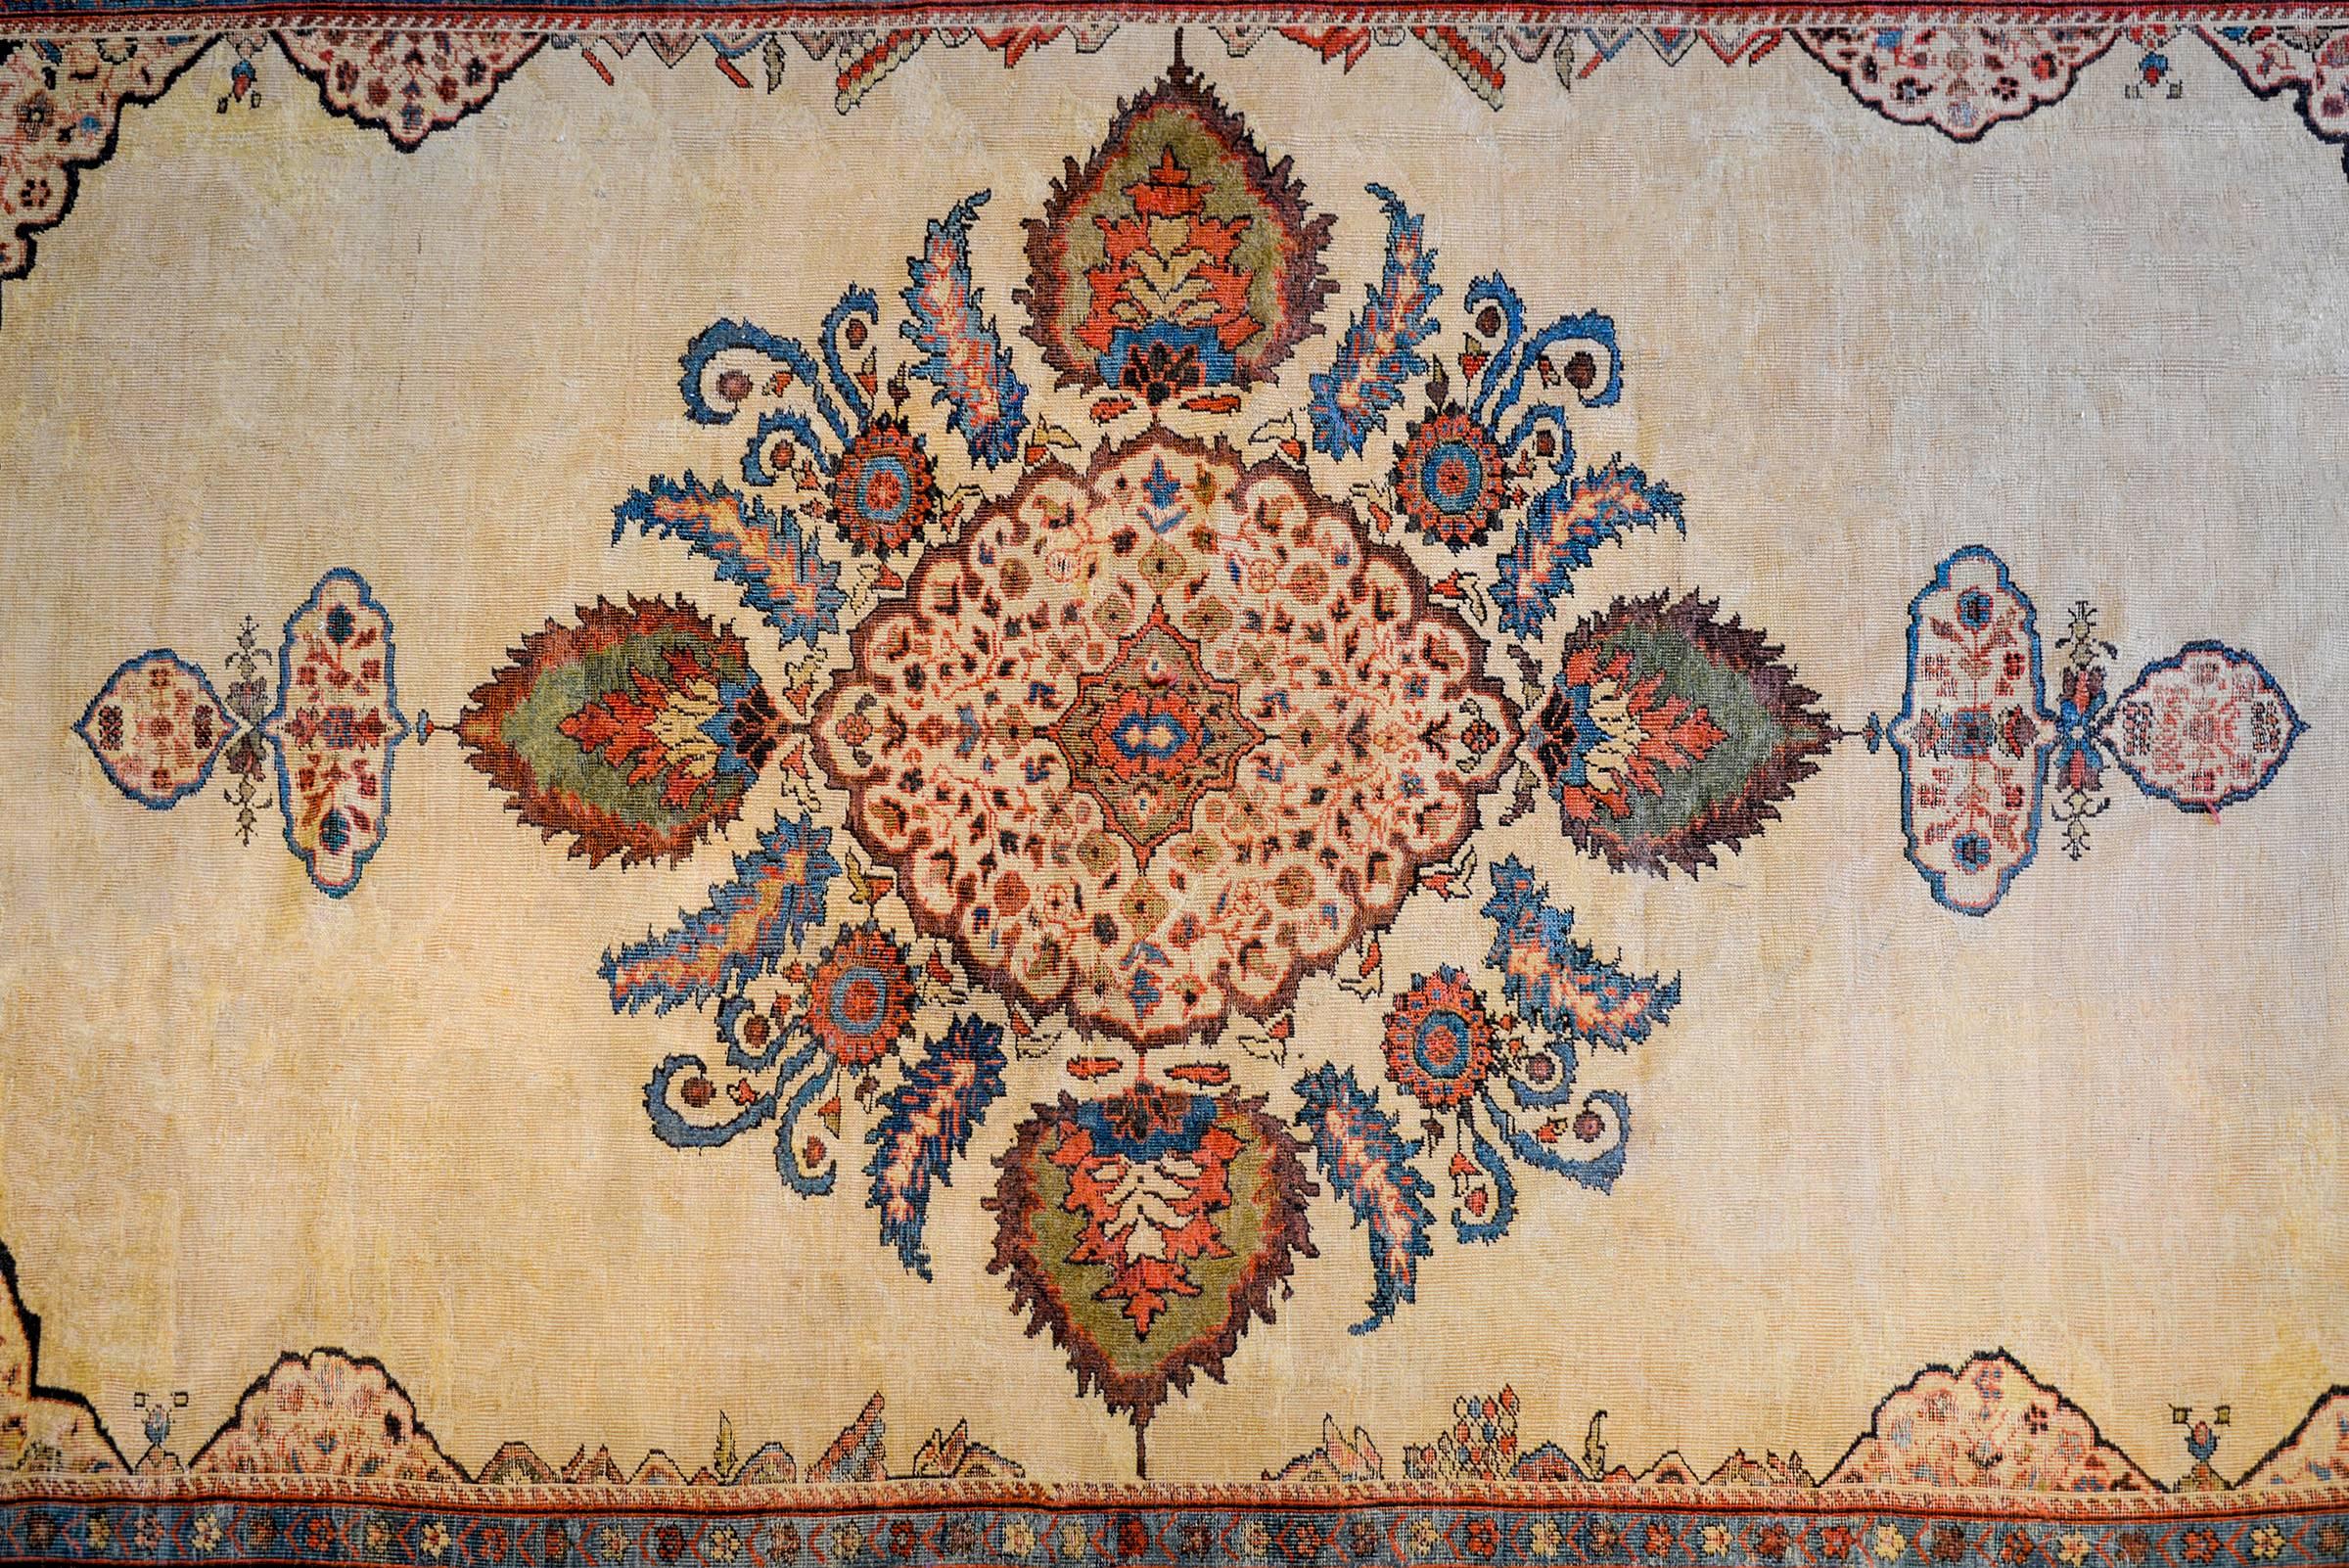 An unbelievable mid-19th century Persian Ziegler Sultanabad rug with a beautiful large-scale floral and leaf medallion woven in indigo, crimson, green, gold, and natural brown wool on a fantastic undyed natural cream colored wool background. The